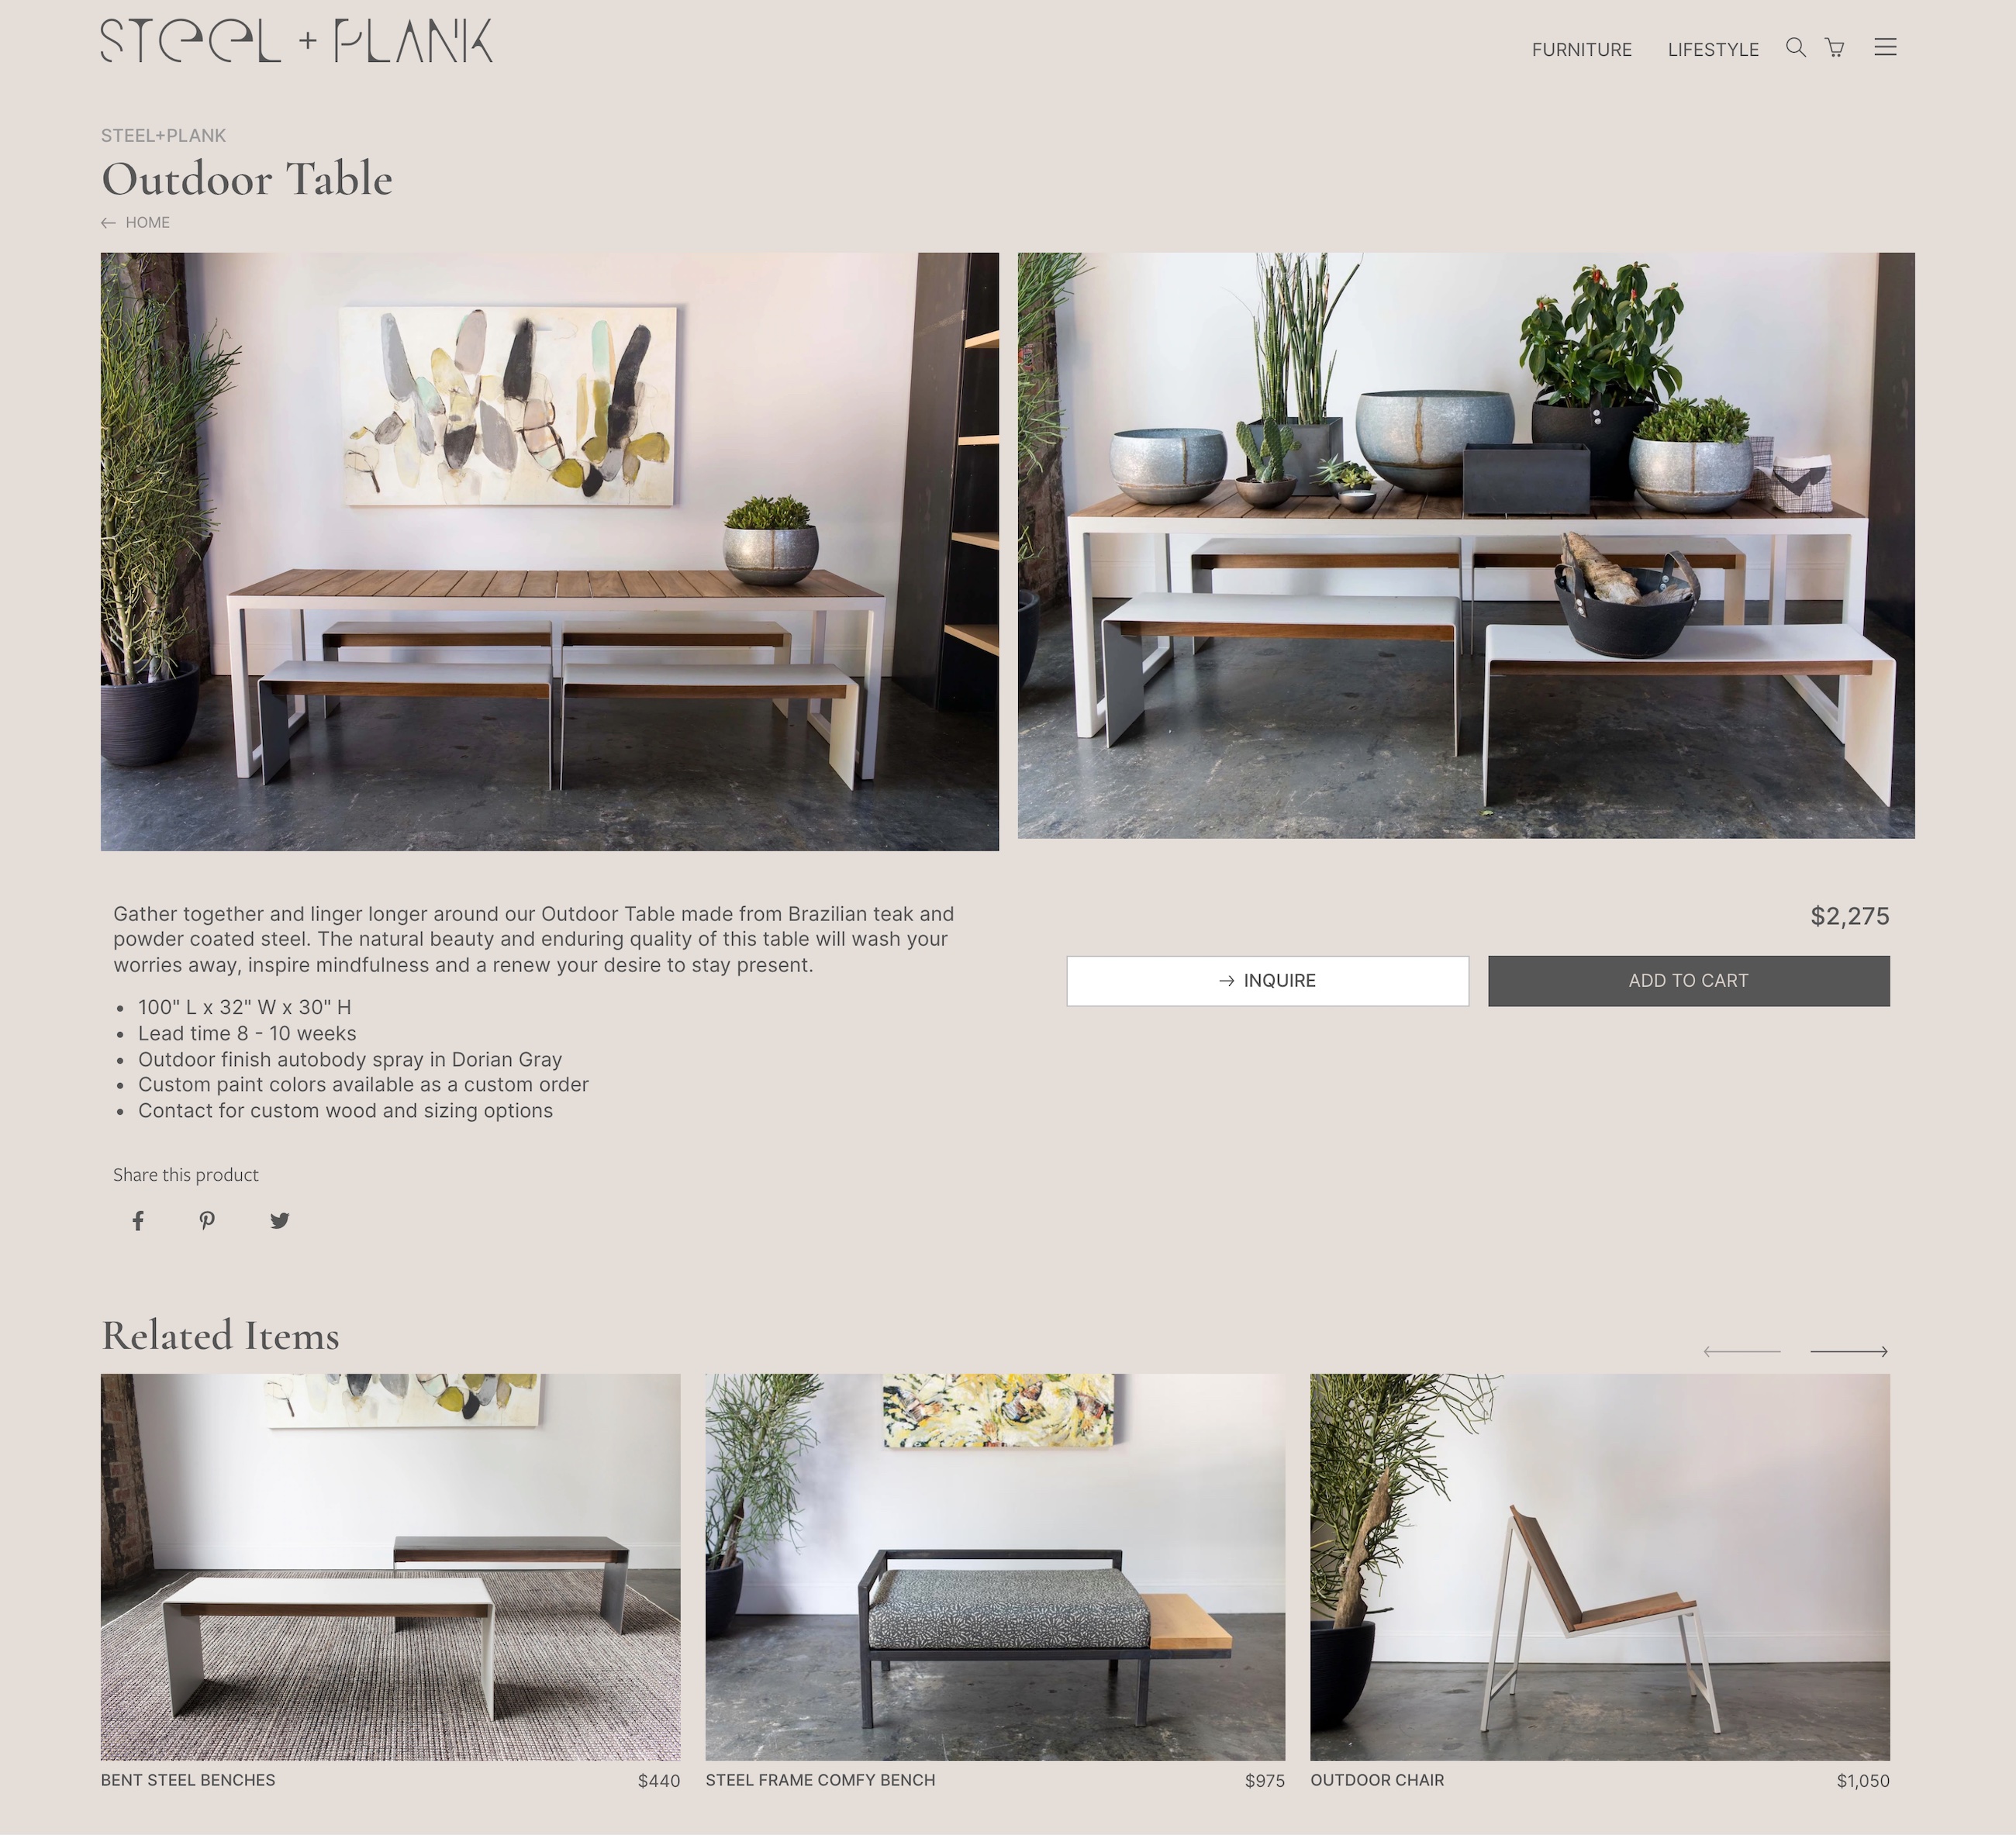 Steel & Plank furniture product page